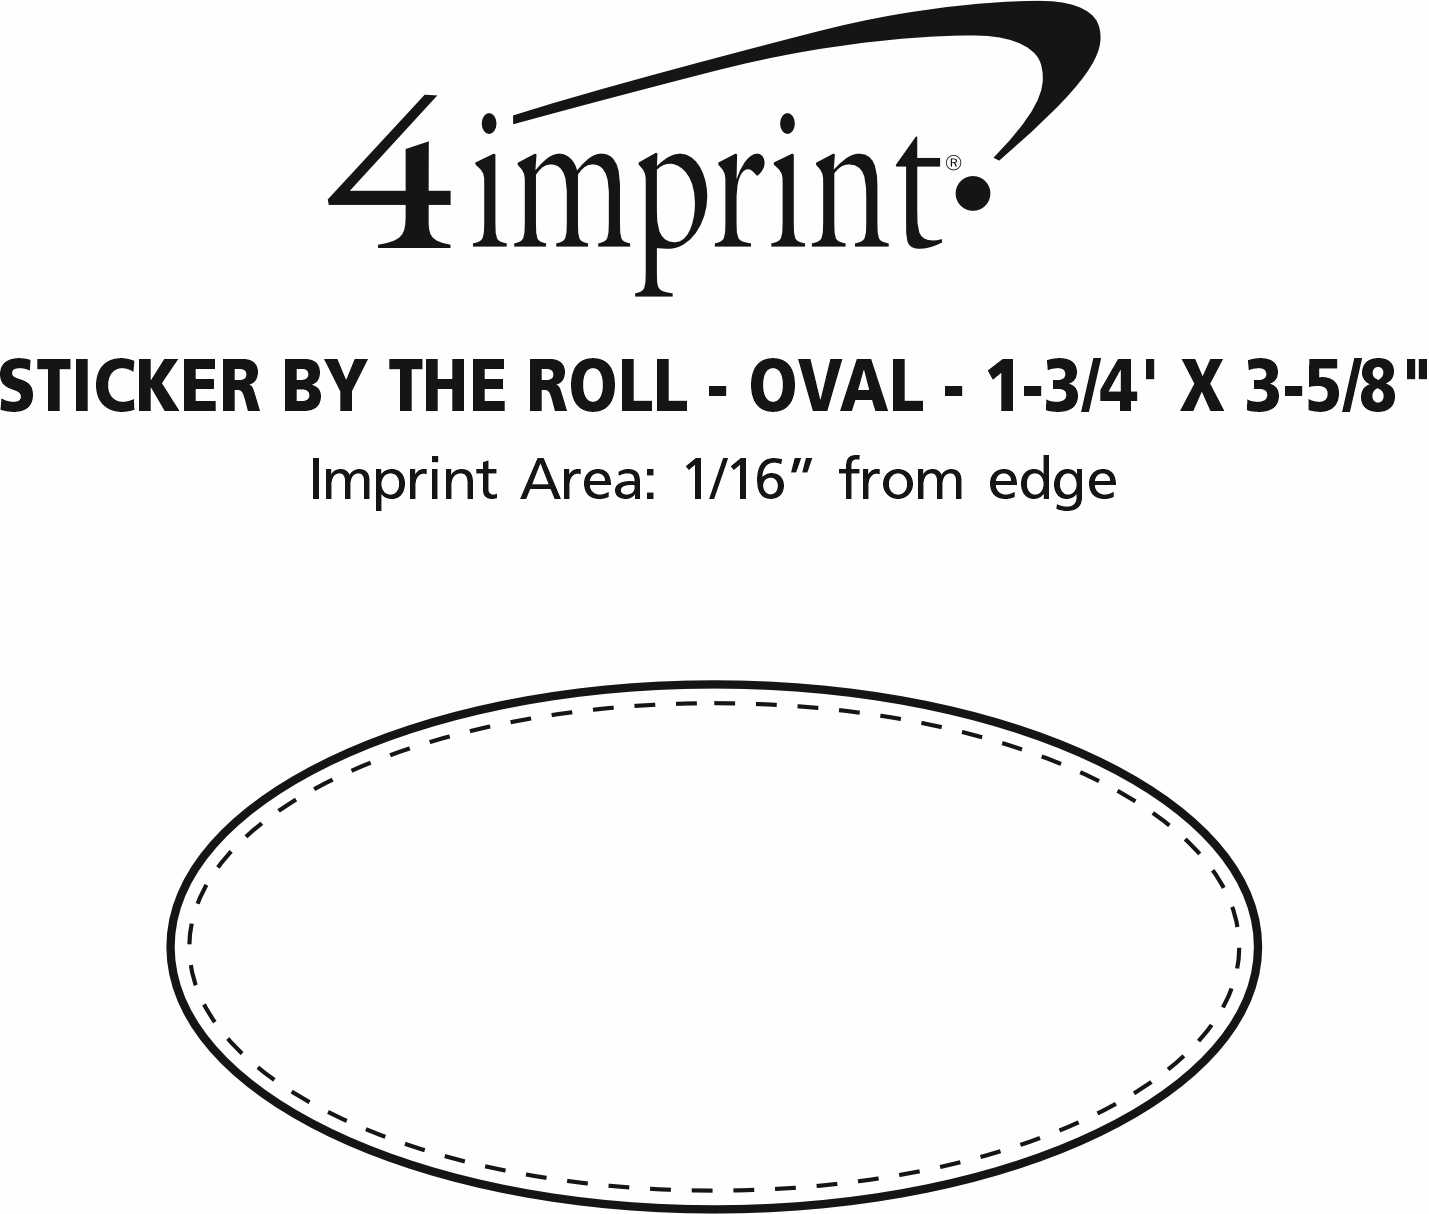 Imprint Area of Sticker by the Roll - Oval - 1-3/4' x 3-5/8"